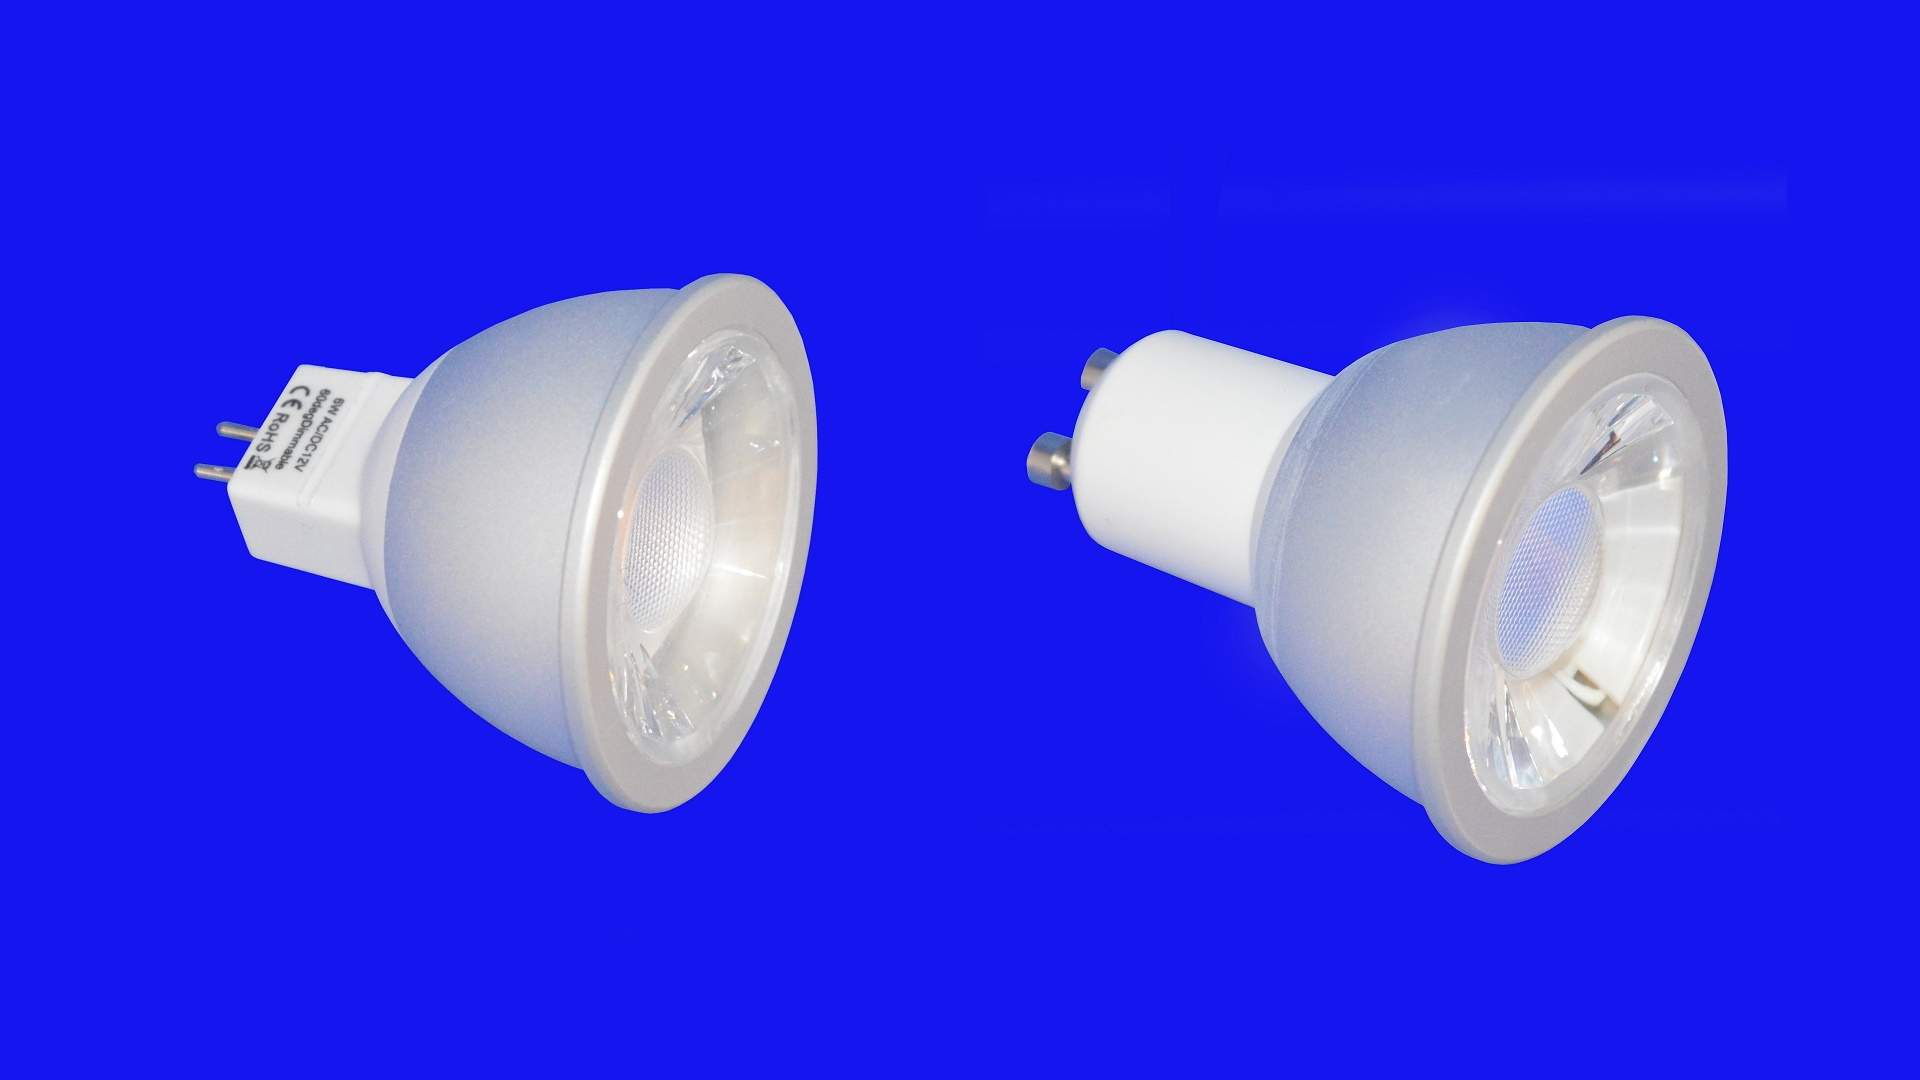 Replacing old halogen light bulbs with modern LED lamps